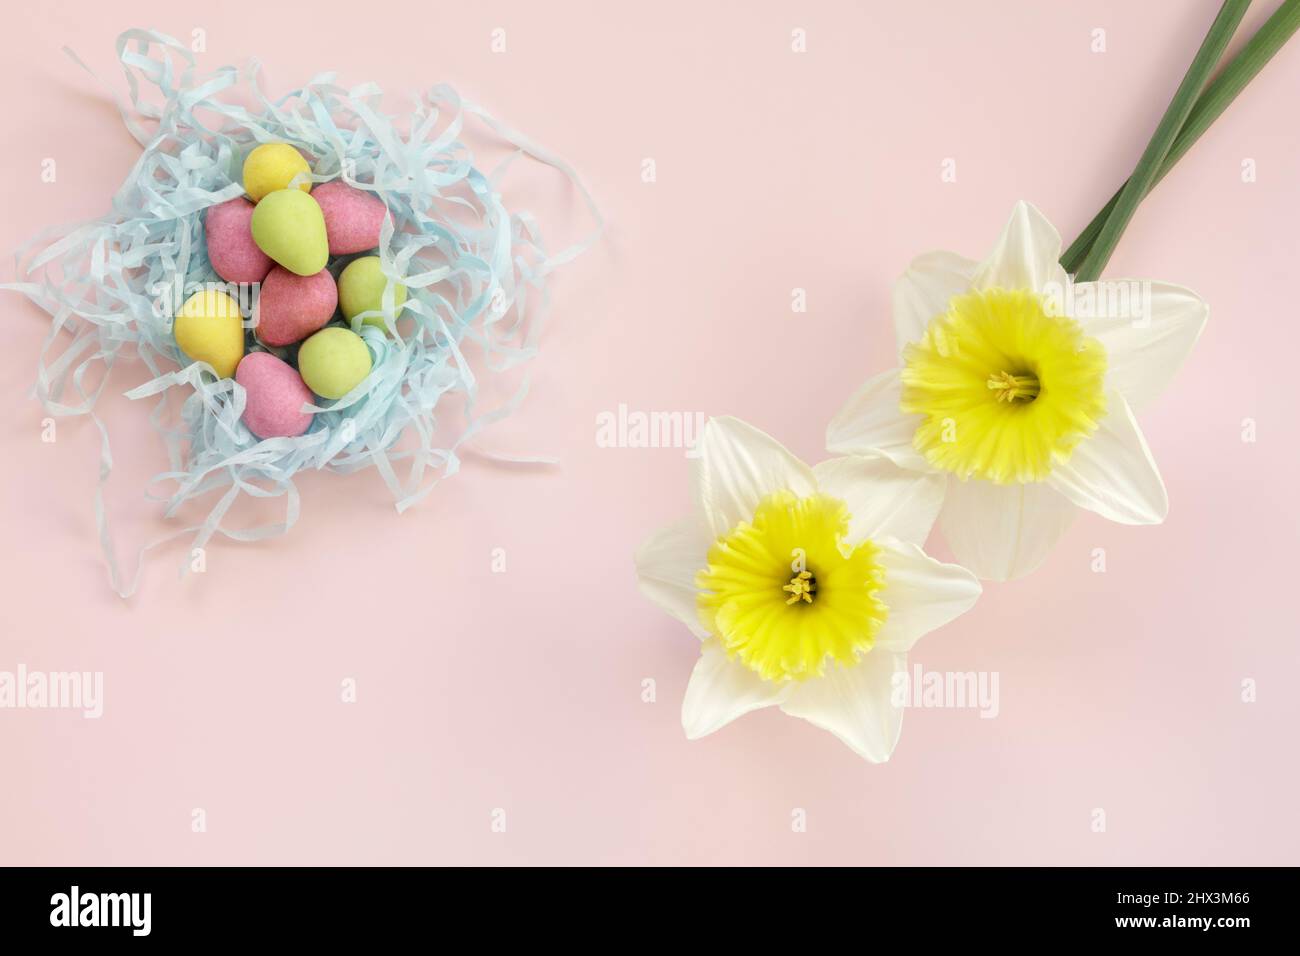 Two Daffodils and coloured mini chocolate eggs from above Stock Photo